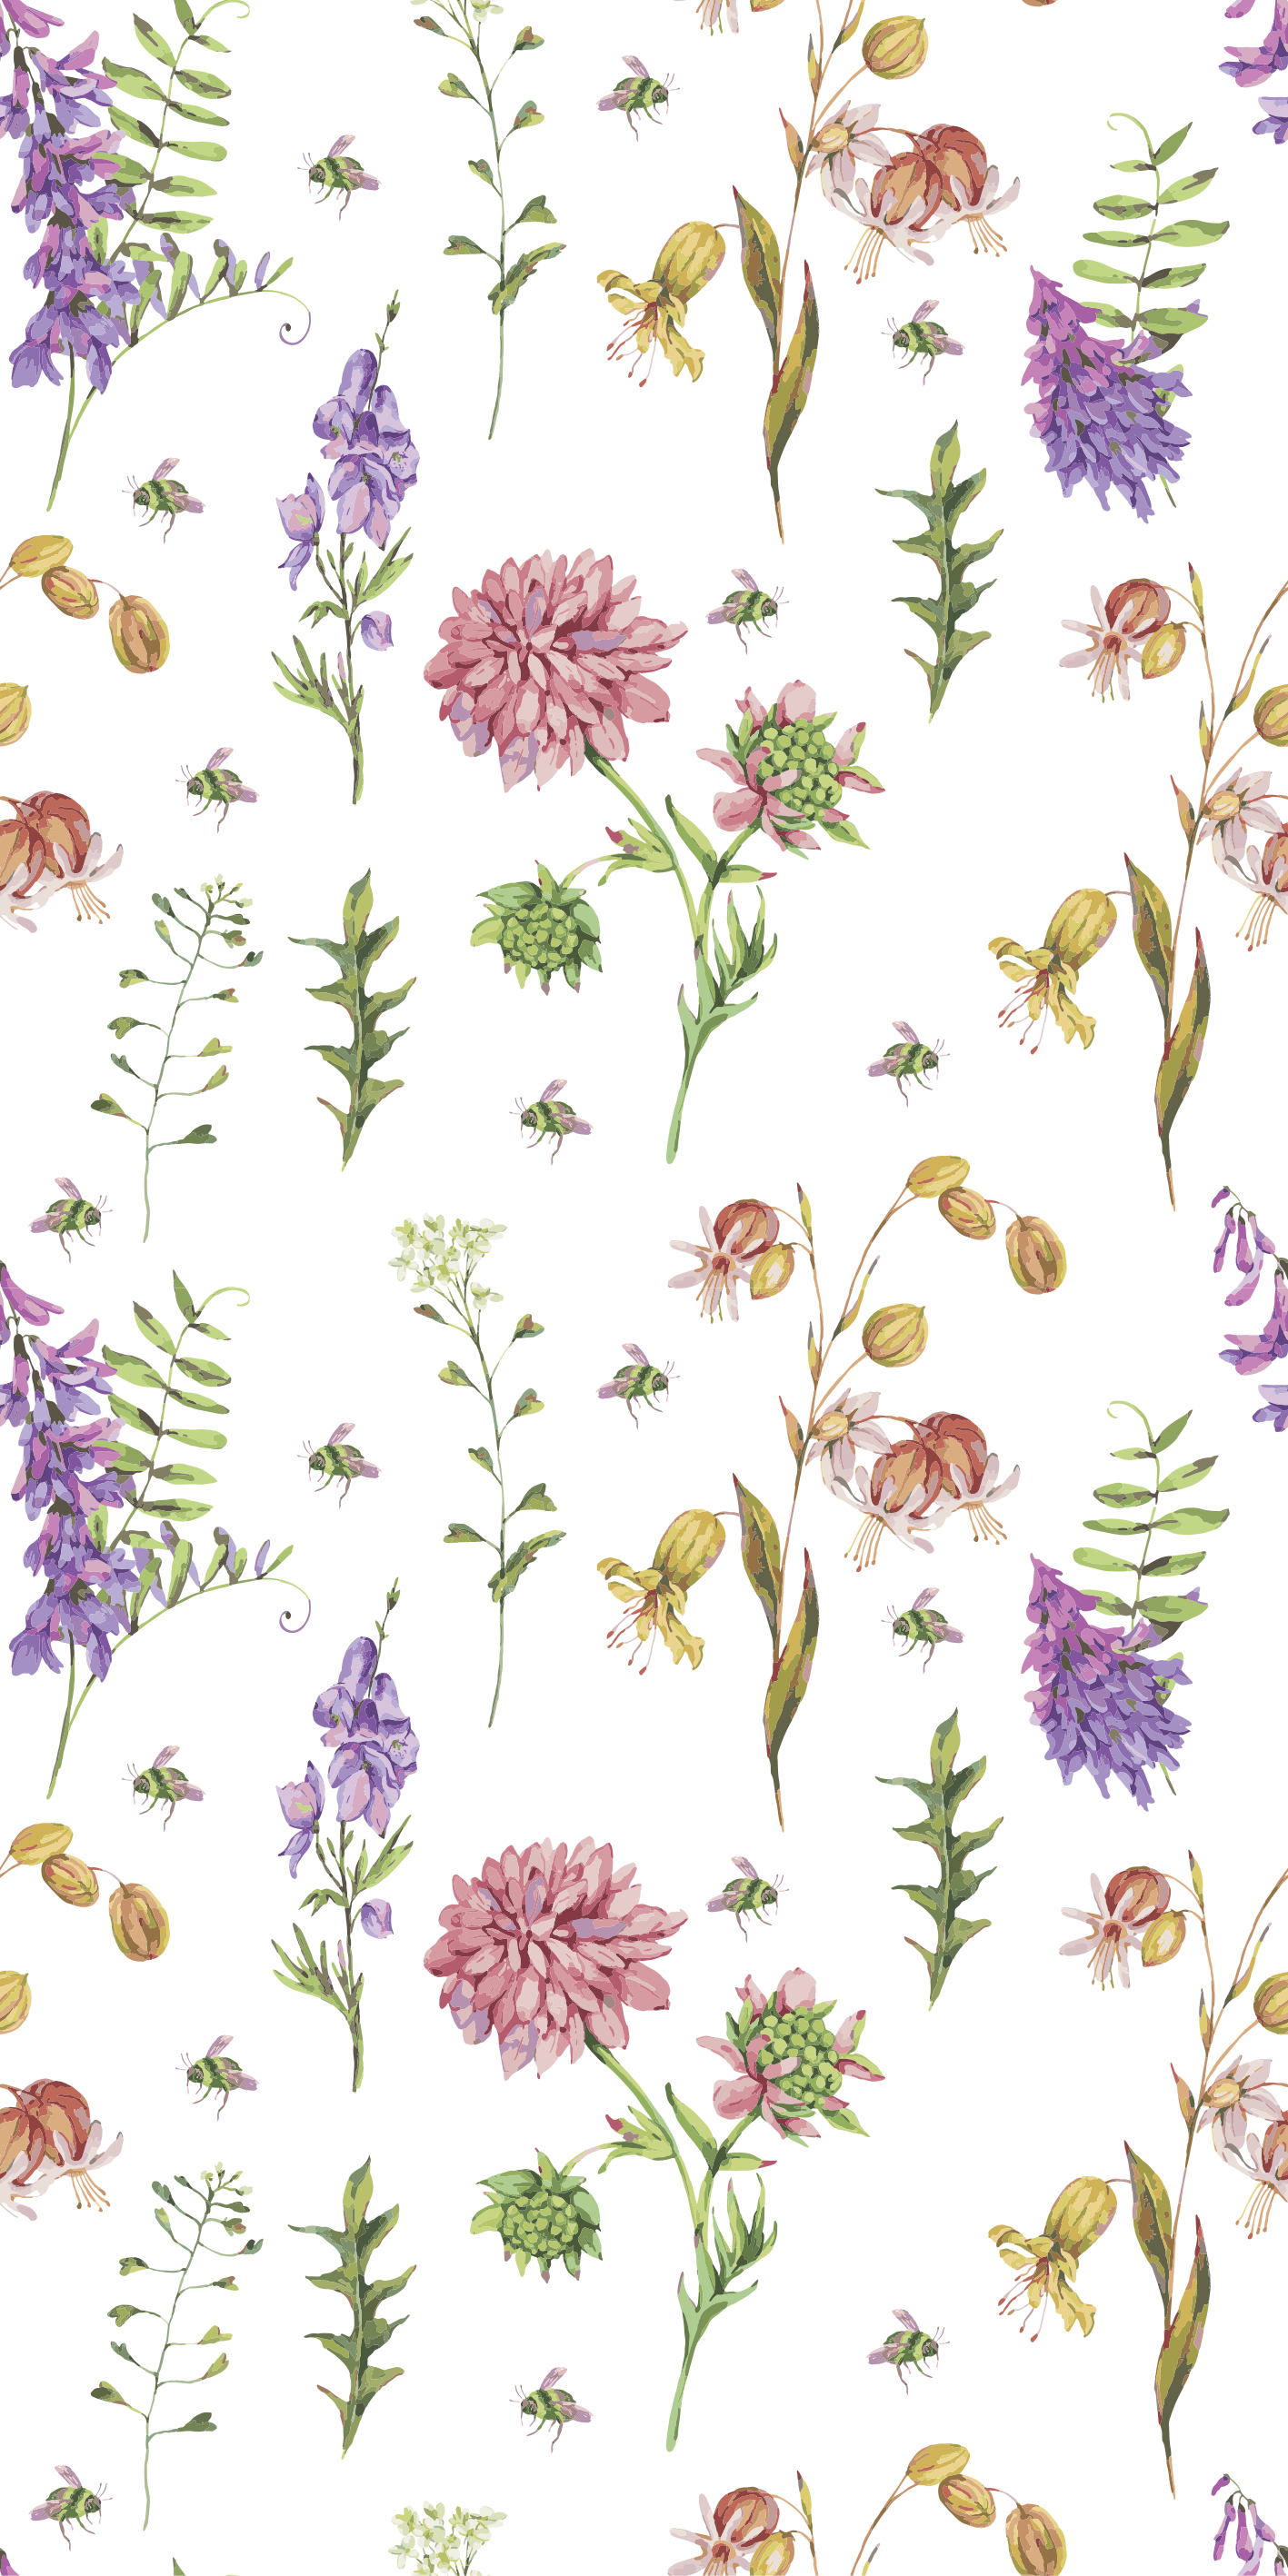 WILDFLOWERS - Stickers muraux - Fleurs sauvages